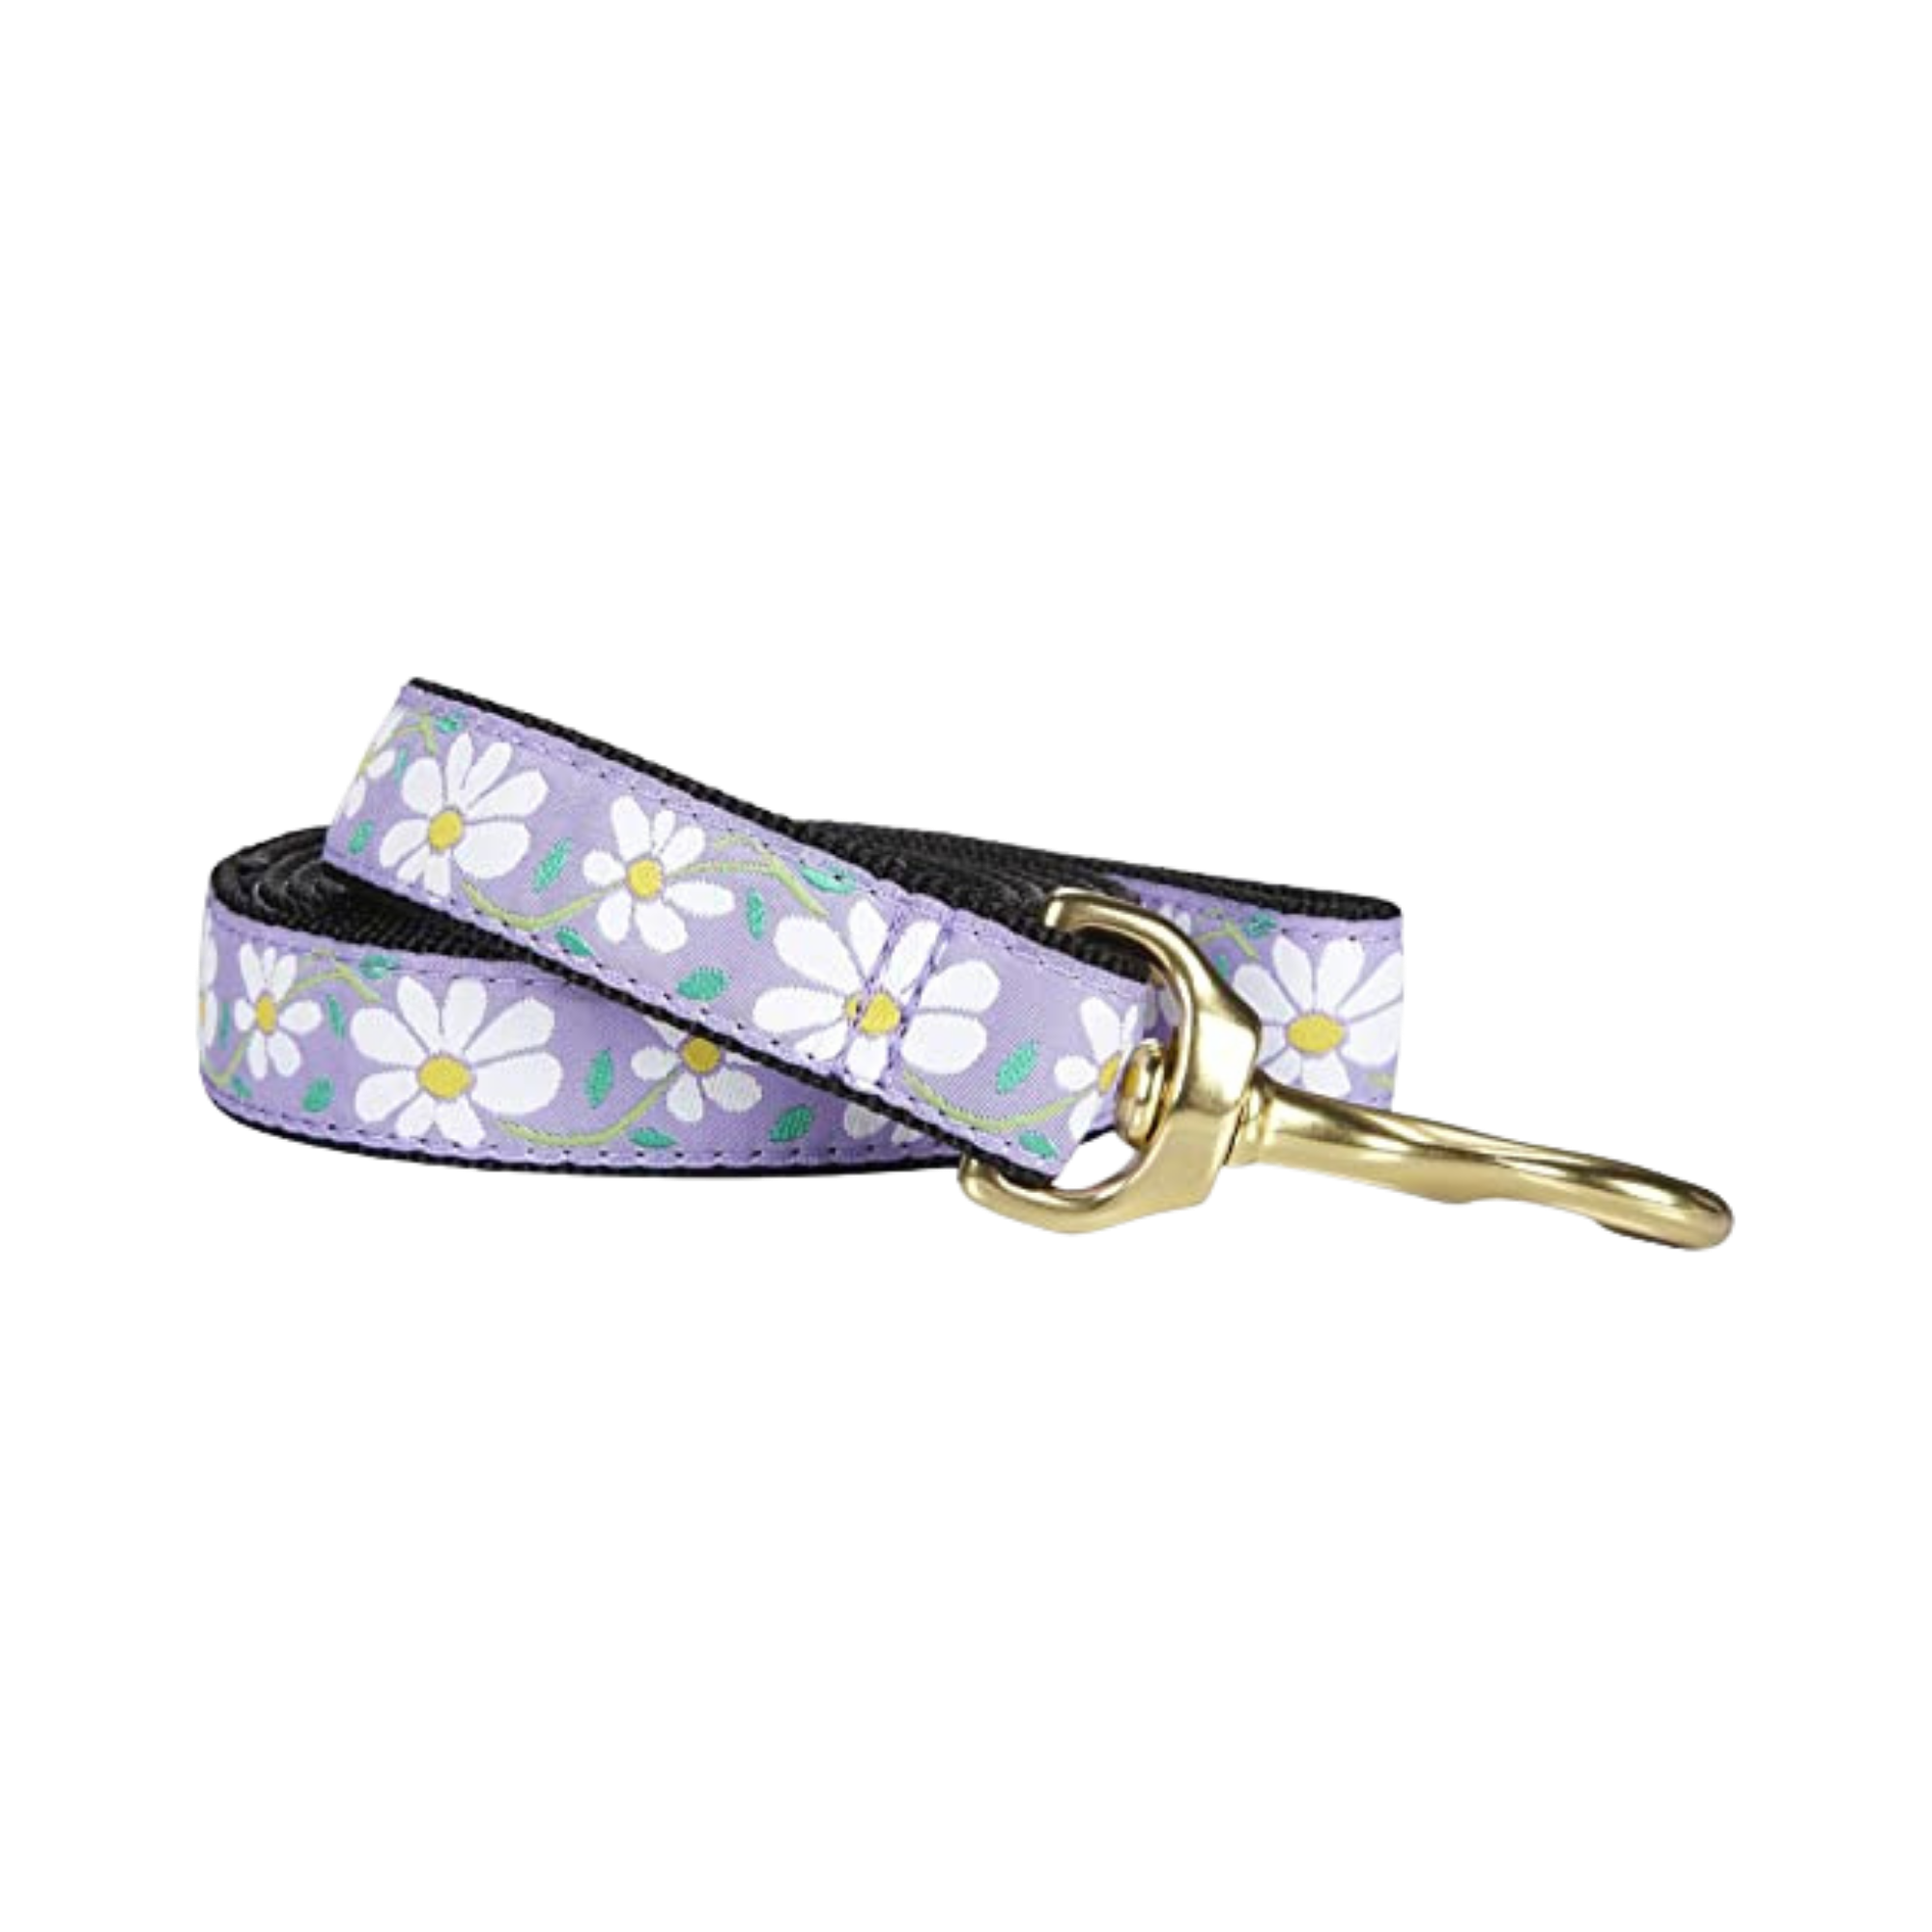 Up Country Daisy Dog Lead - Mutts & Co.